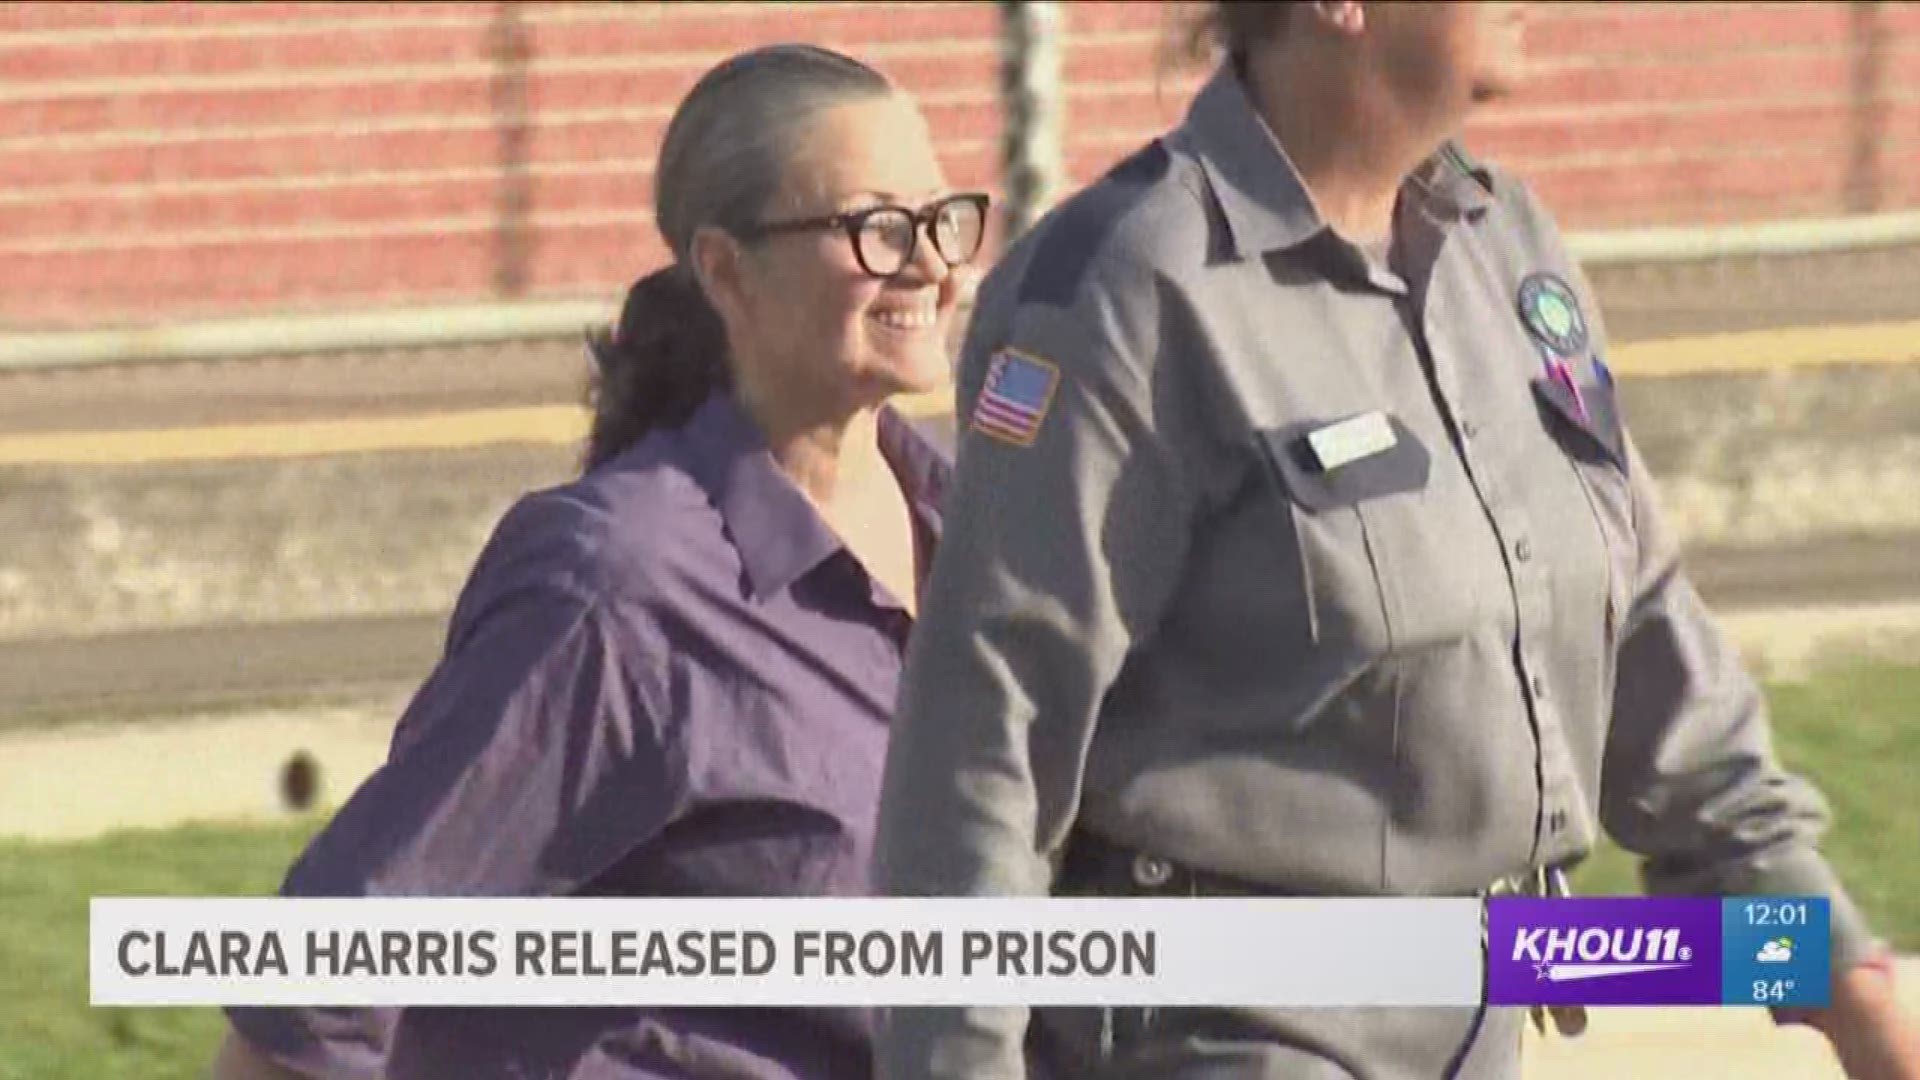 Clara Harris, the Friendswood dentist who ran over her cheating husband in 2002, is being released from prison. Harris was sentenced to 20 years for manslaughter in the death of 44-year-old David Harris, an orthodontist.